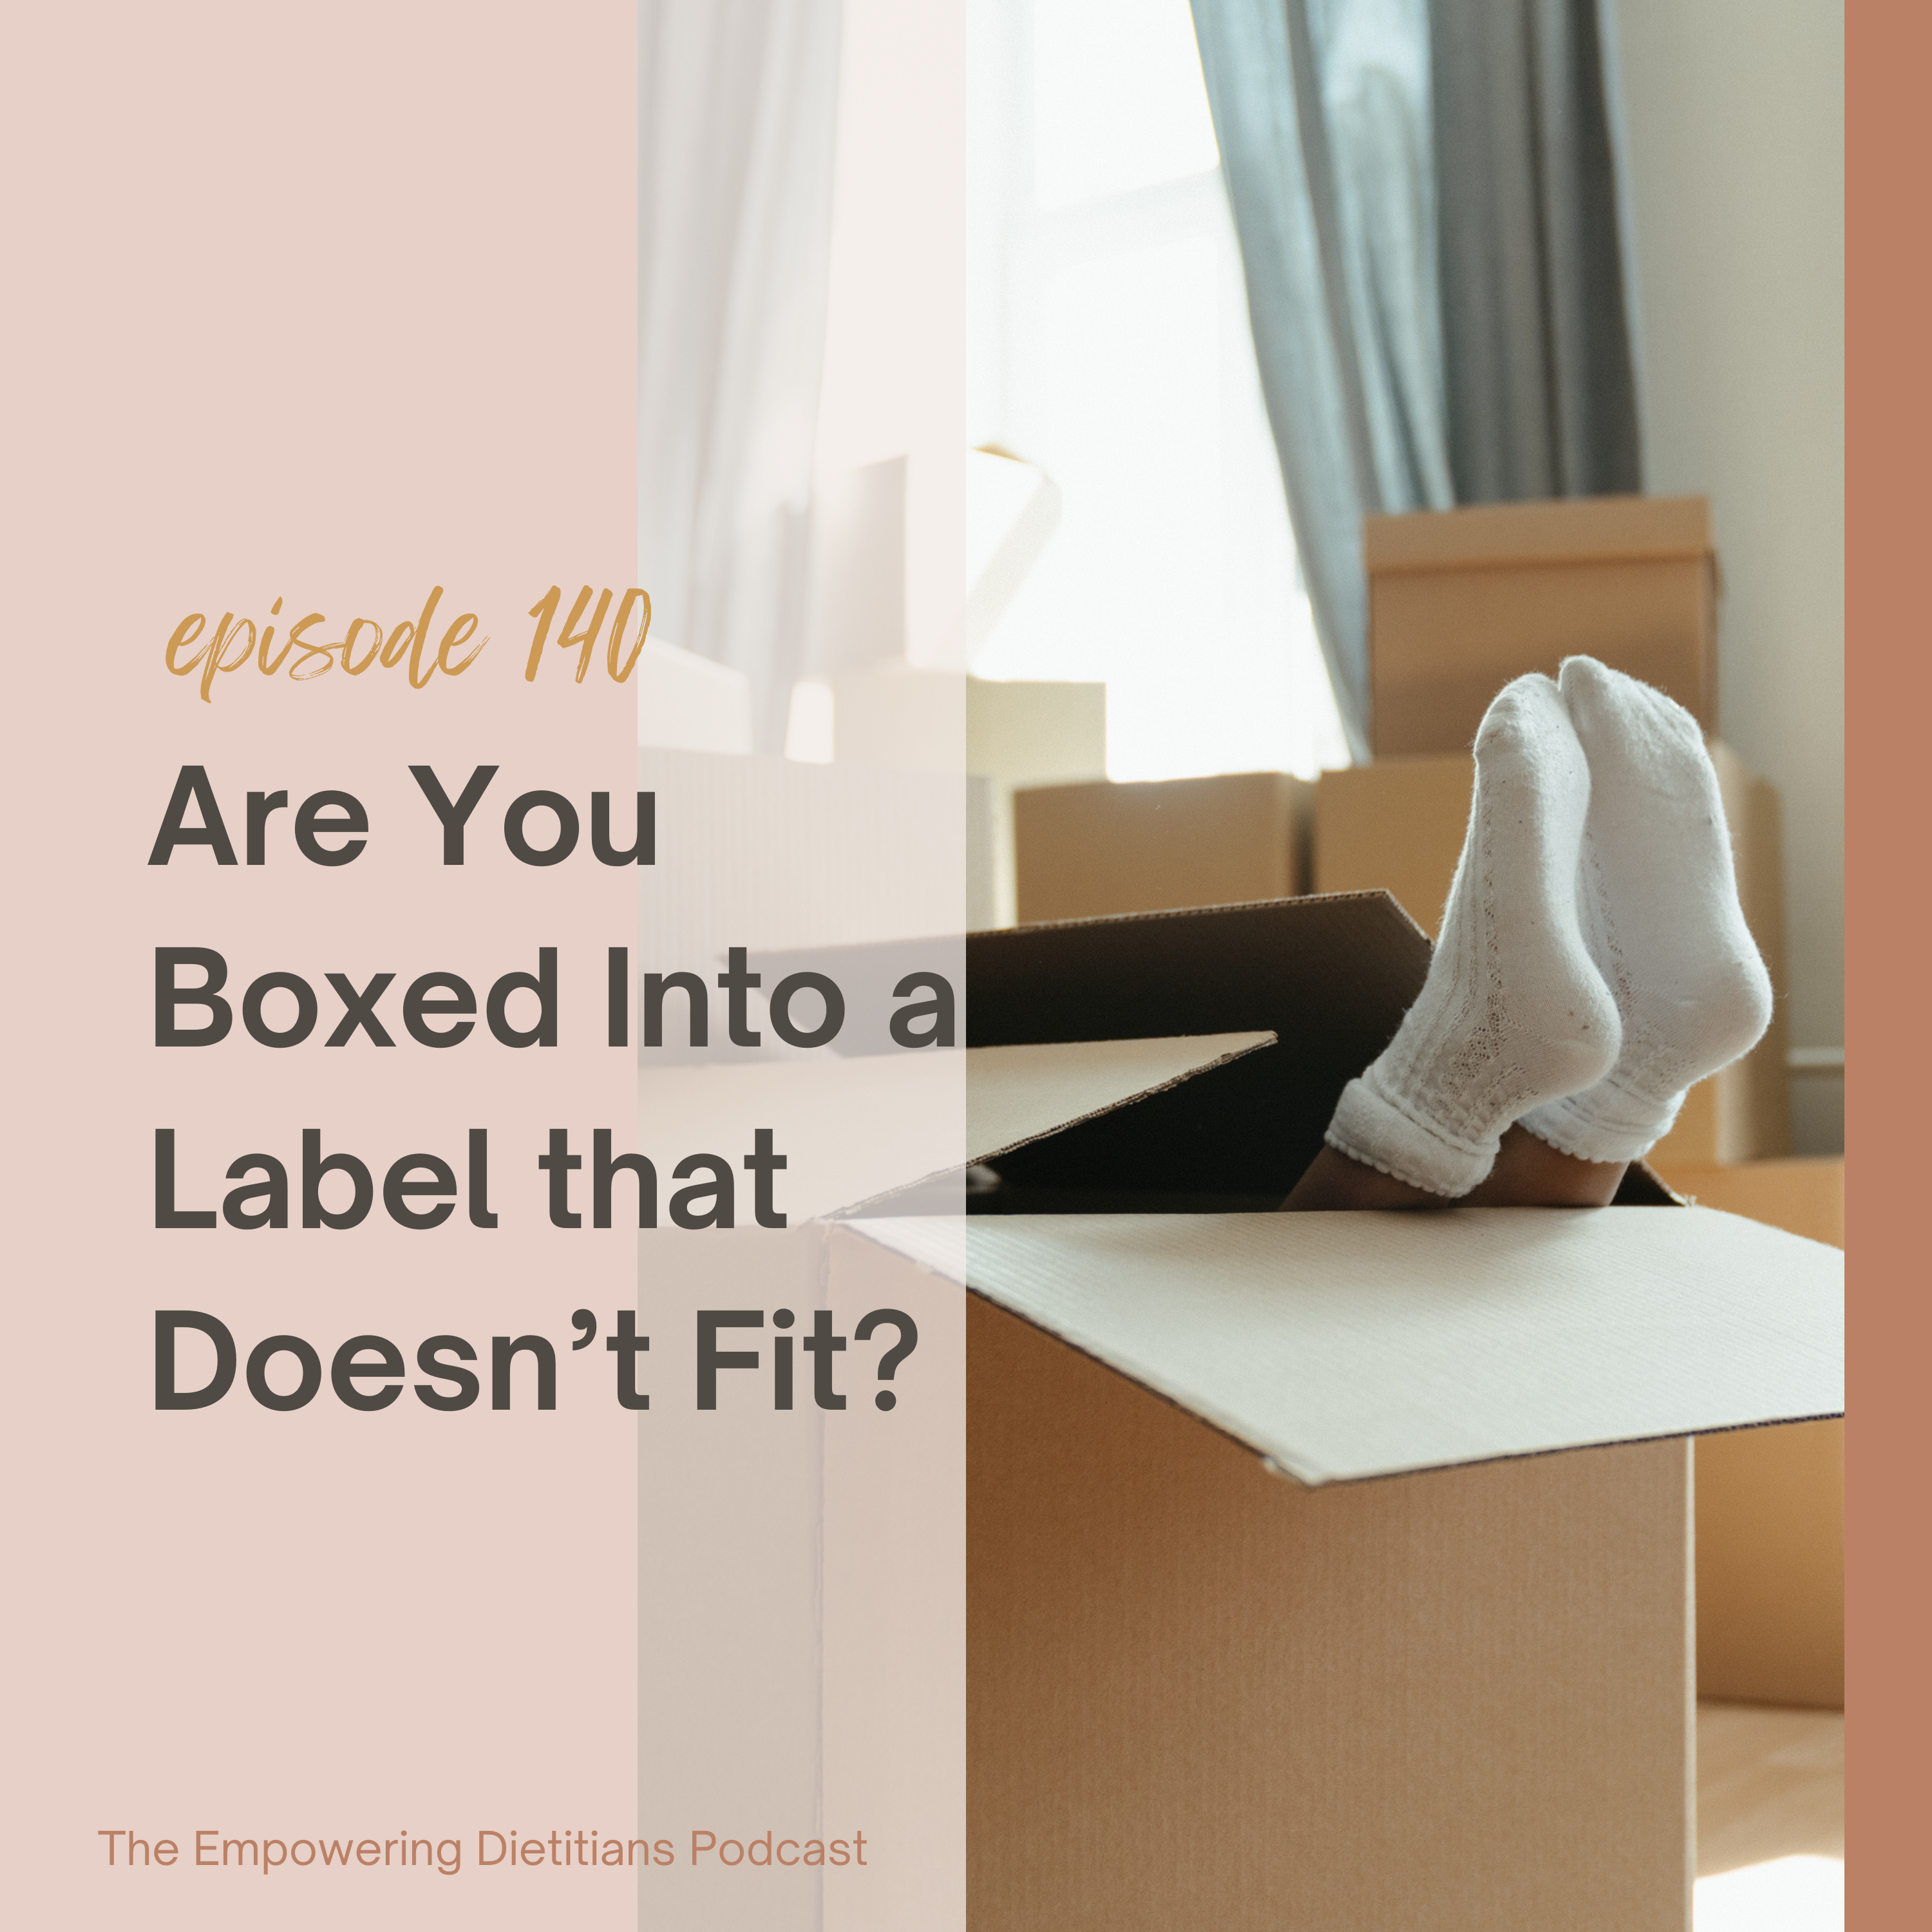 Are You Boxed Into a Label that Doesn't Fit?